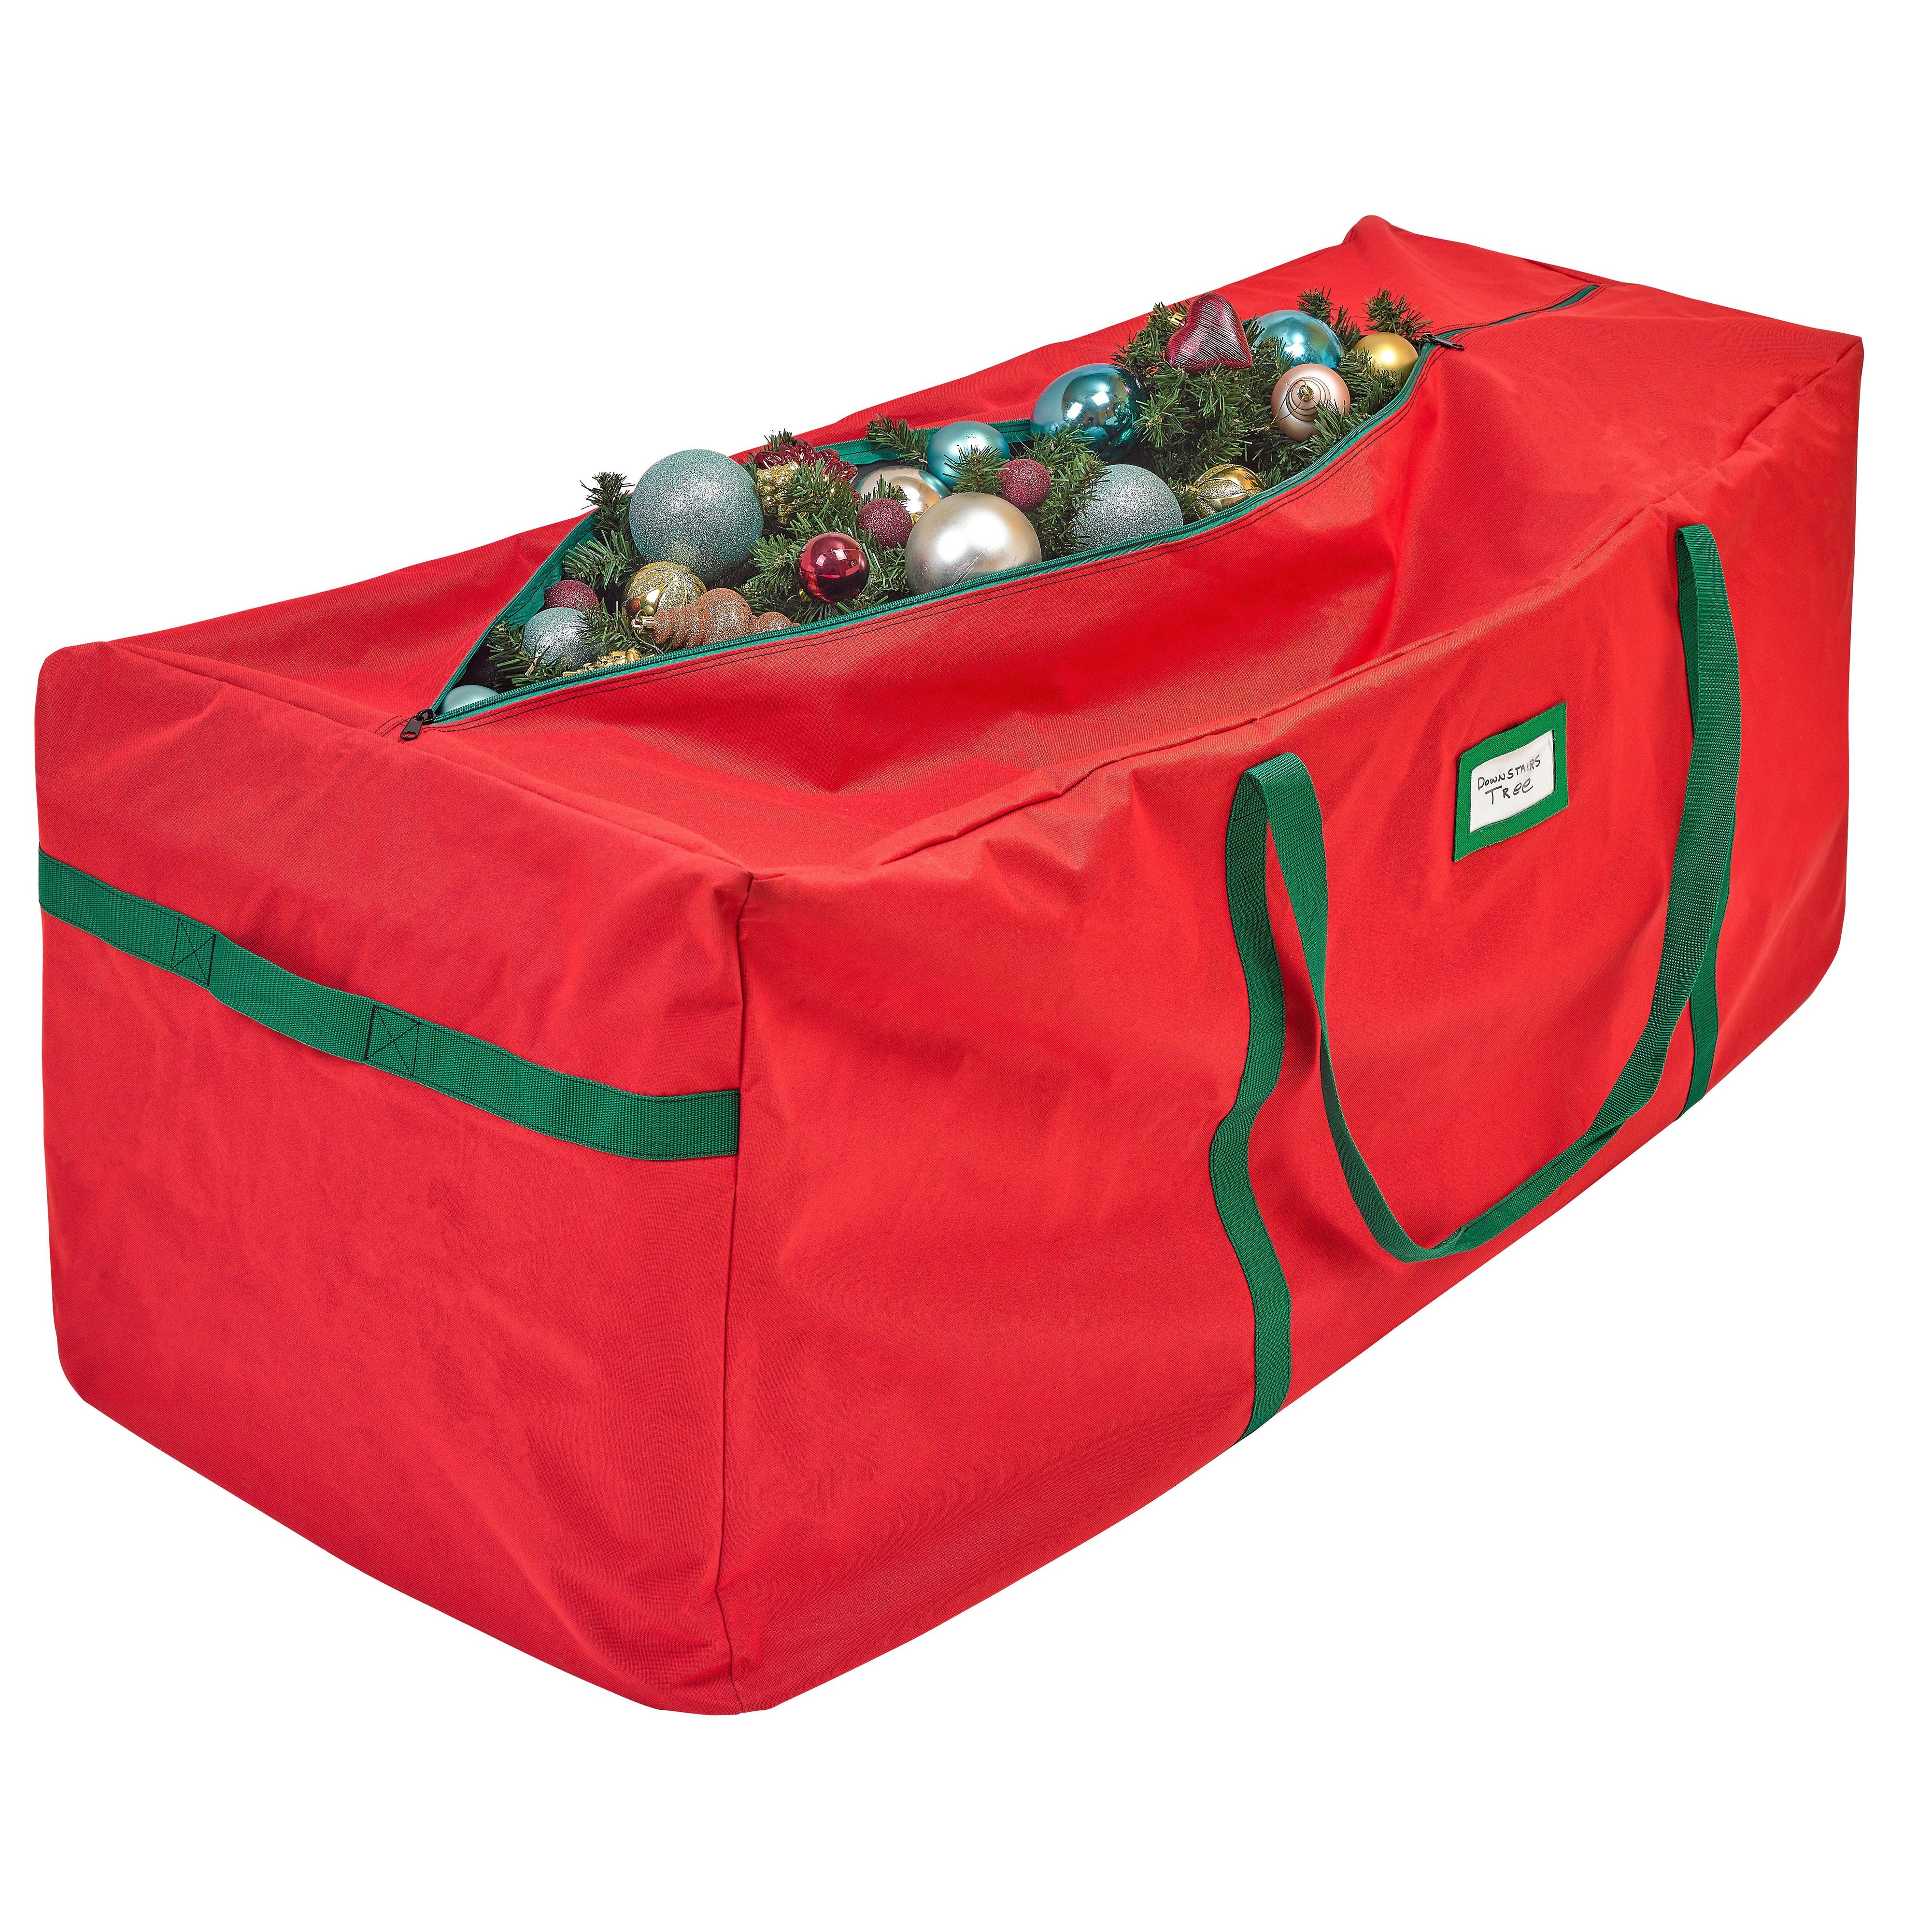 Christmas Tree Bag Heavy Duty 600D Oxford - Christmas Tree Bags Storage Fits Up To 9Ft, Waterproof Storage Bags with Reinforced Handles & Zipper